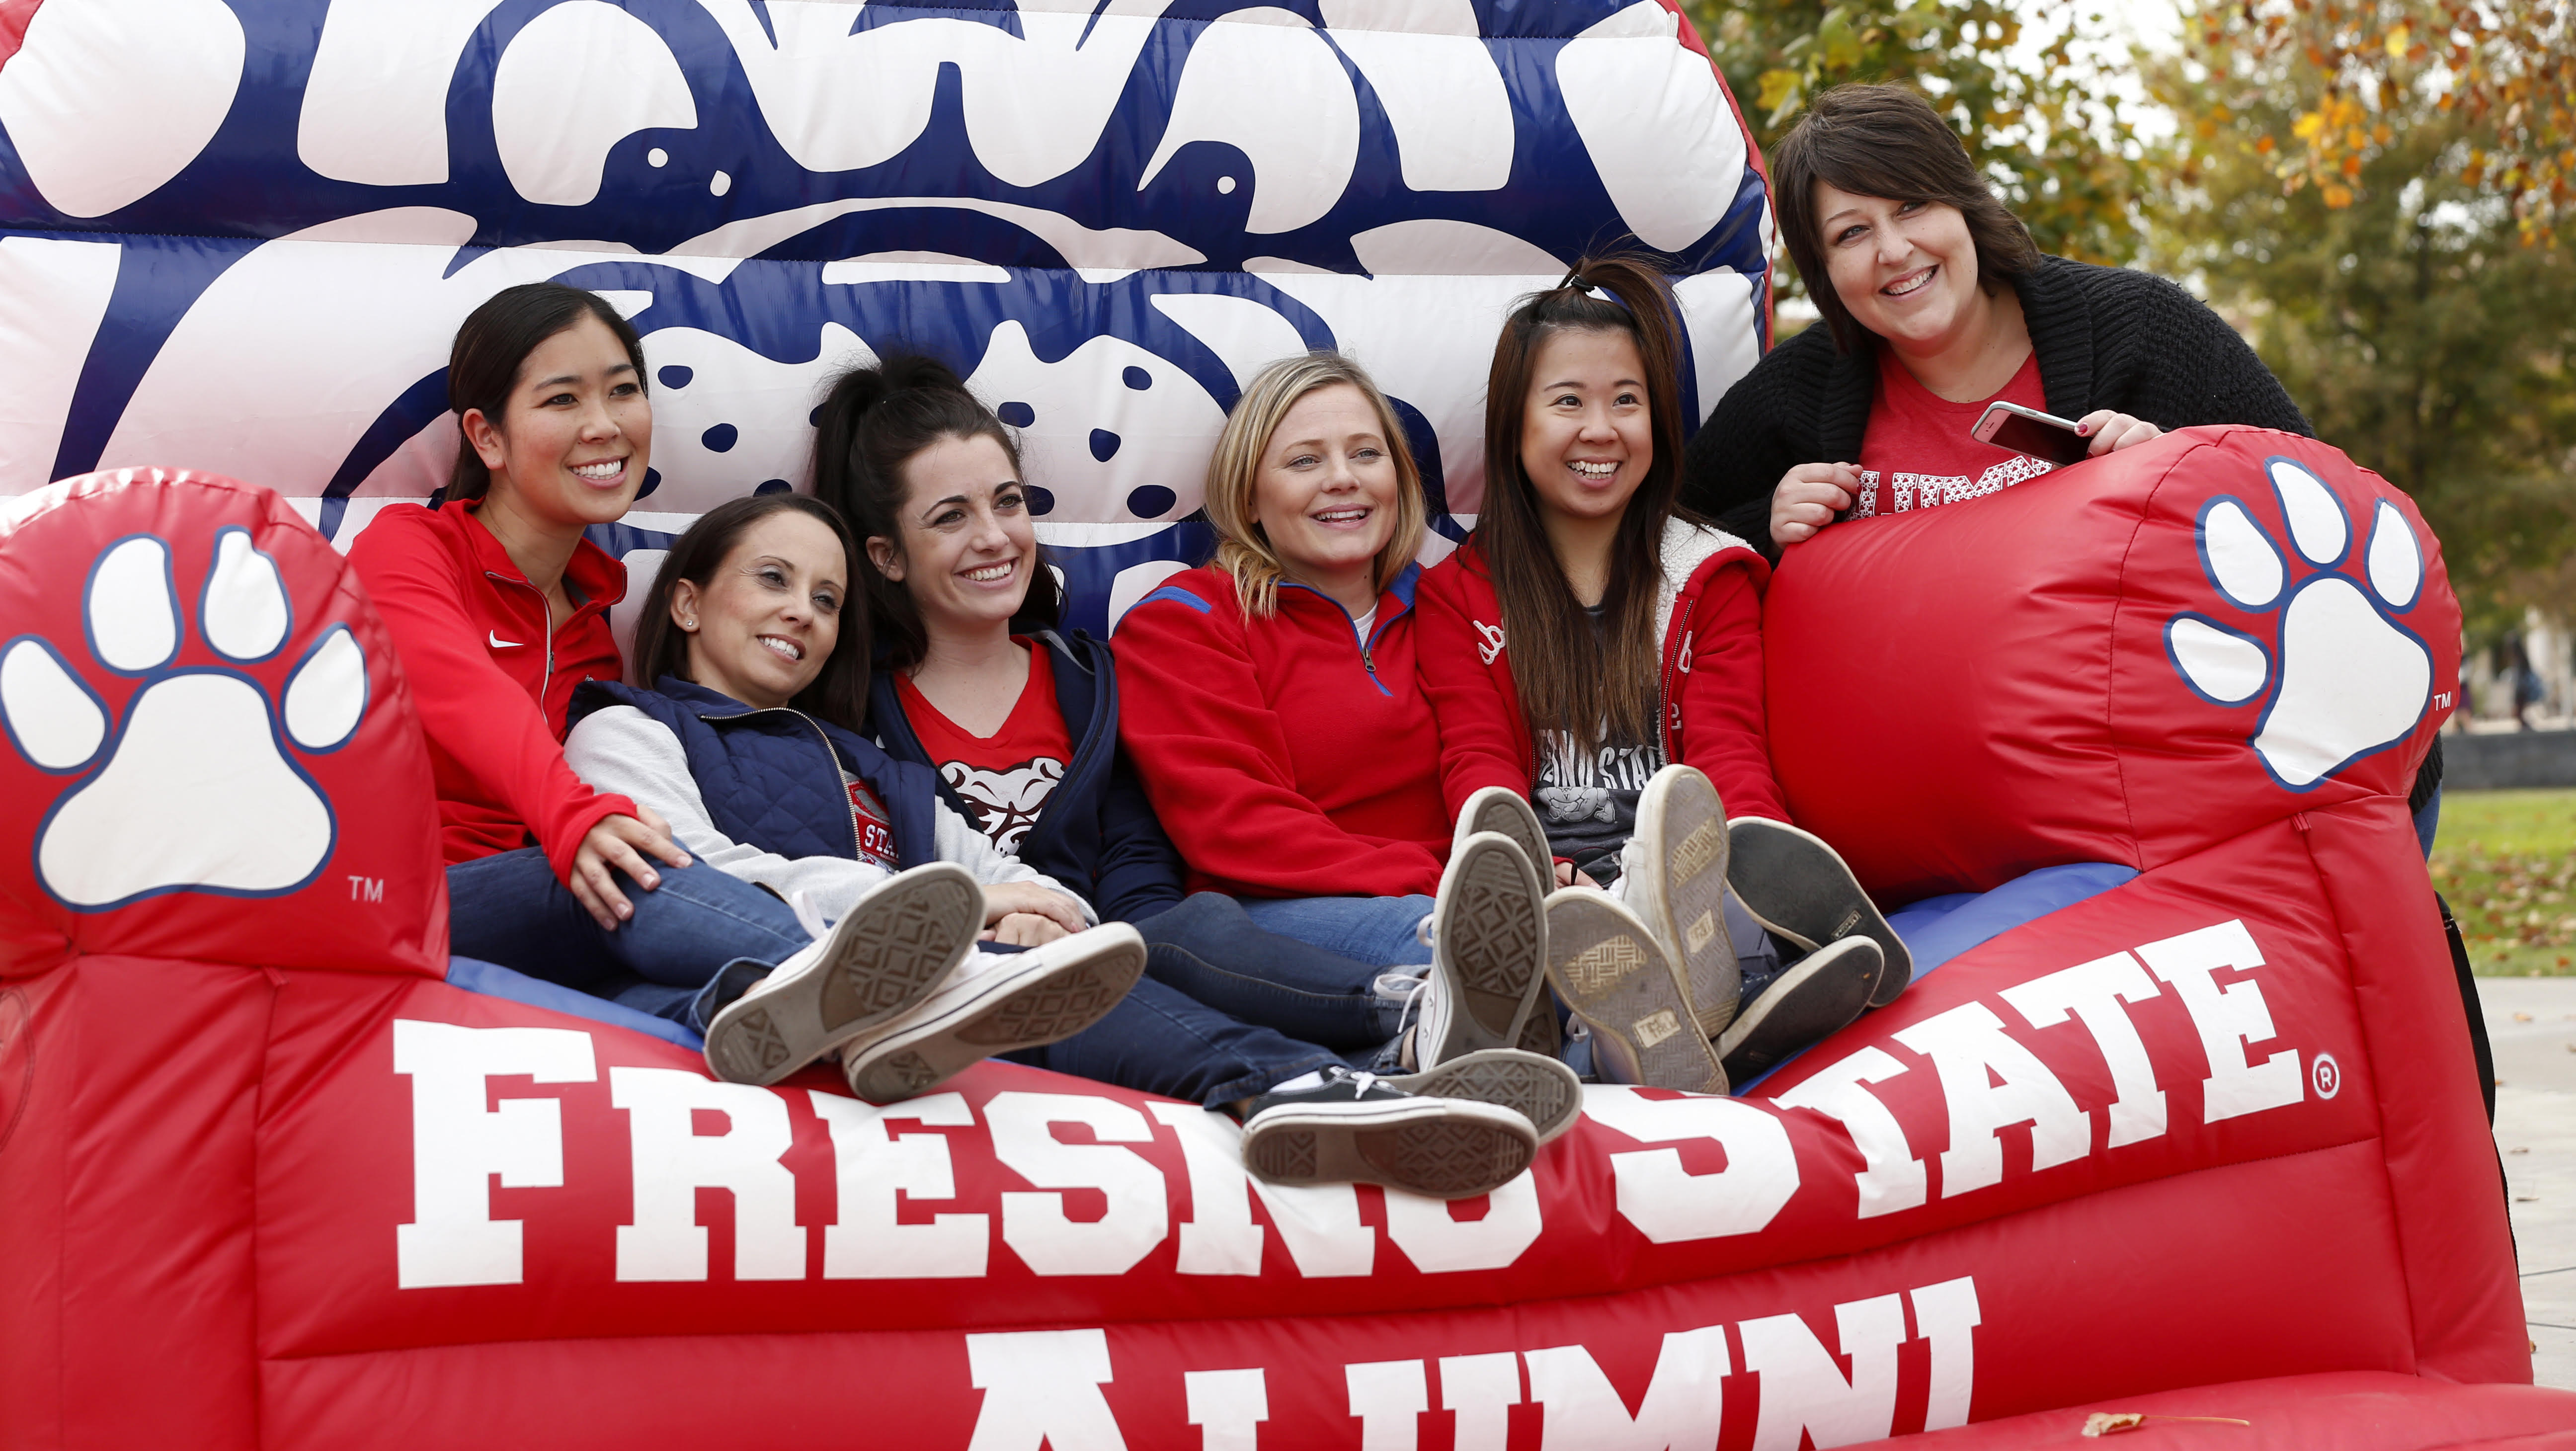 Asheline Beeson and other employees on an overstuffed inflated chair that says Fresno State alumni